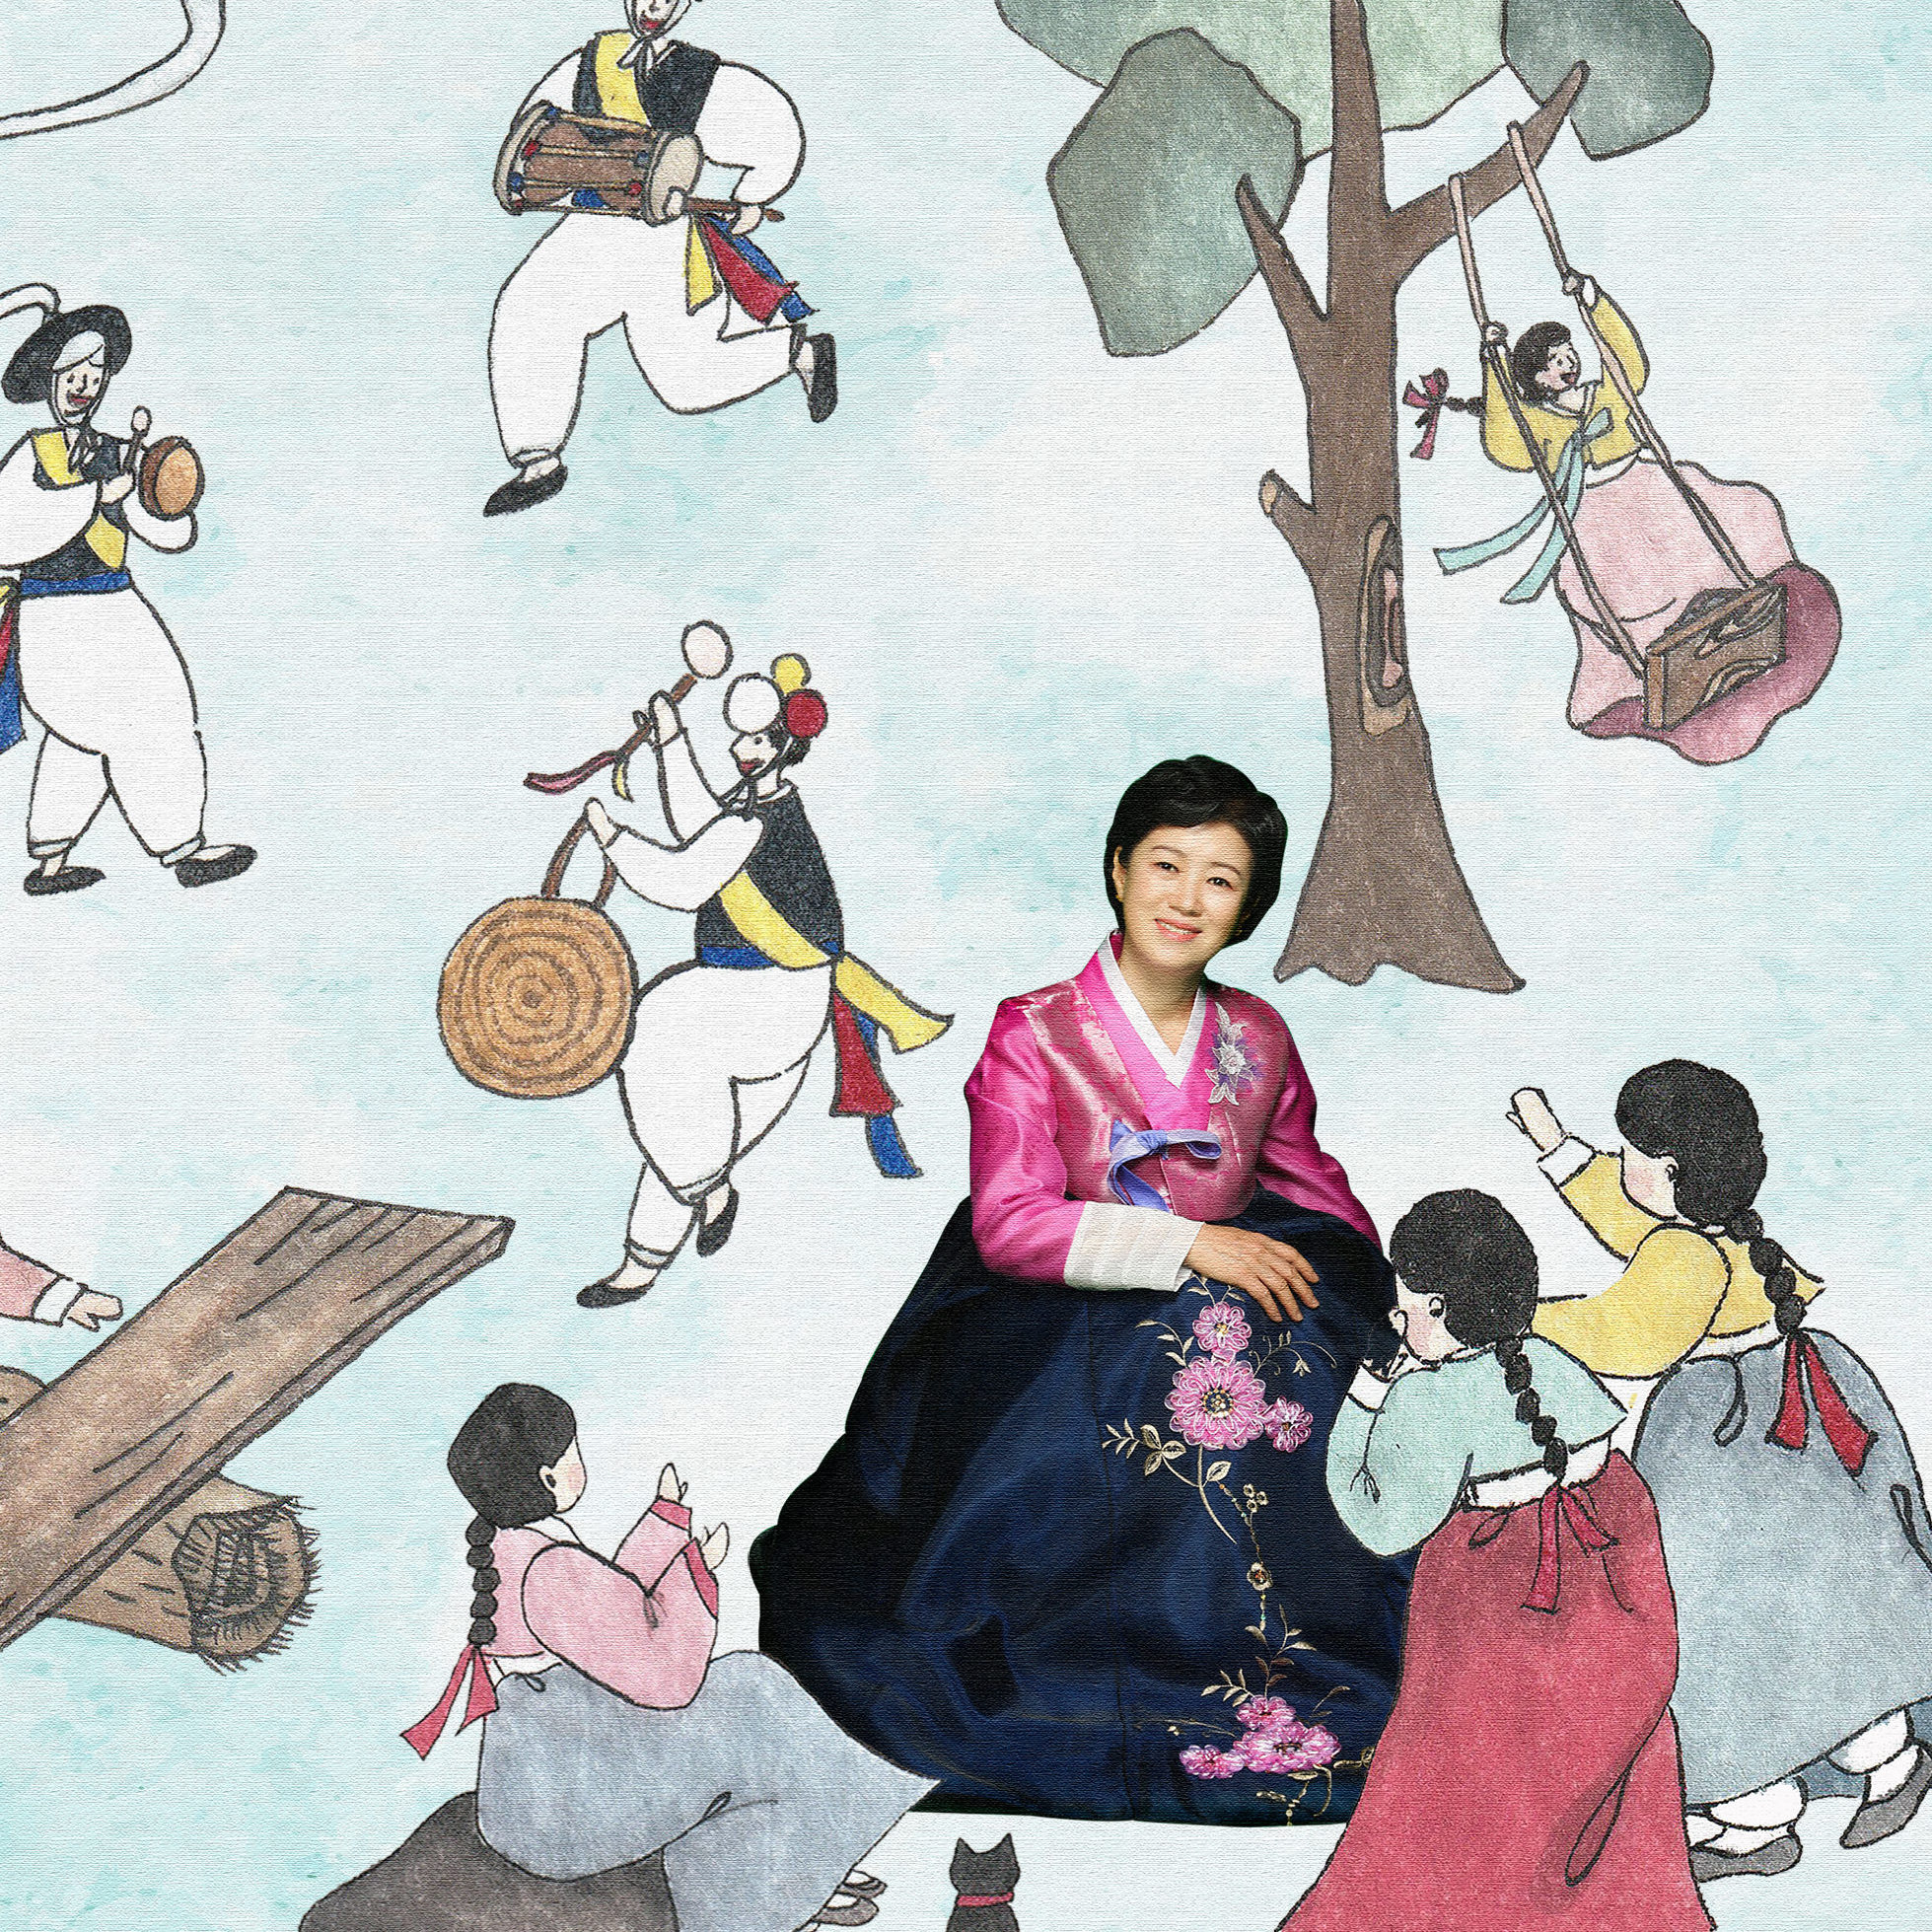 Heejeong sits wearing a traditional Korean dress. She is surrounded by illustrations of 8 people in traditional Korean clothes playing games and music.